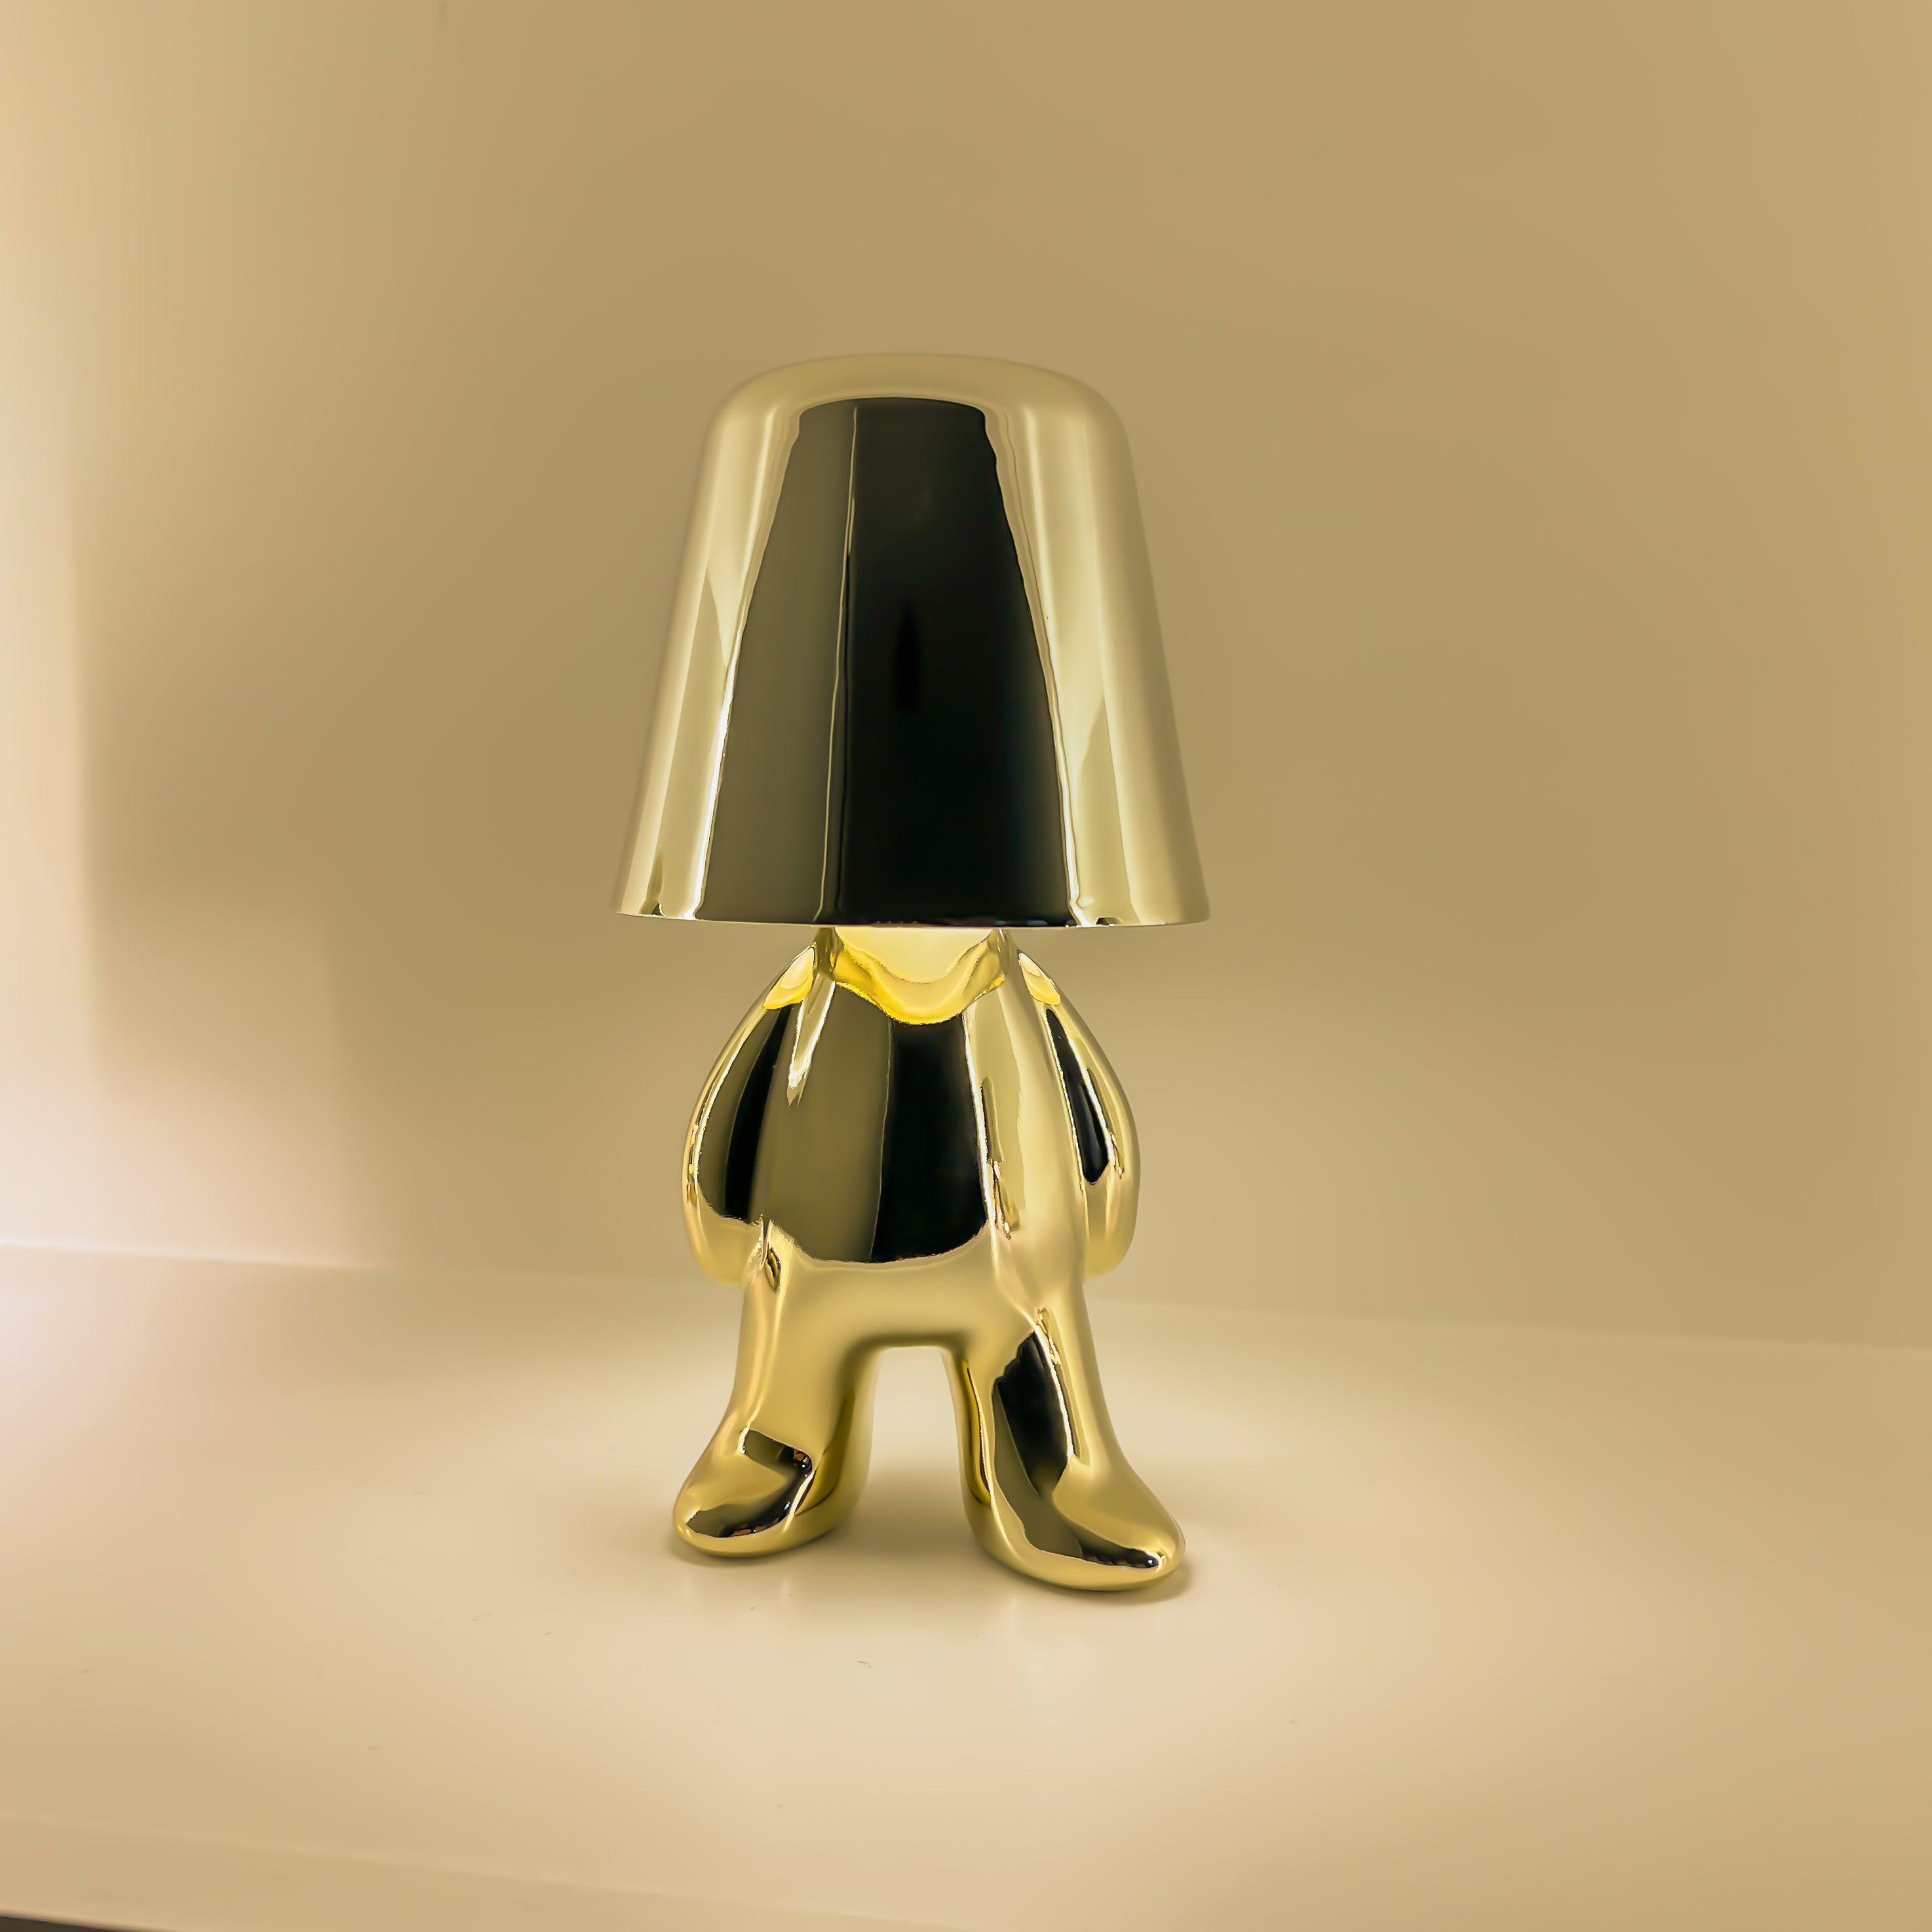 Chilling Brothers - Lamp Collection - Casa Di Lumo